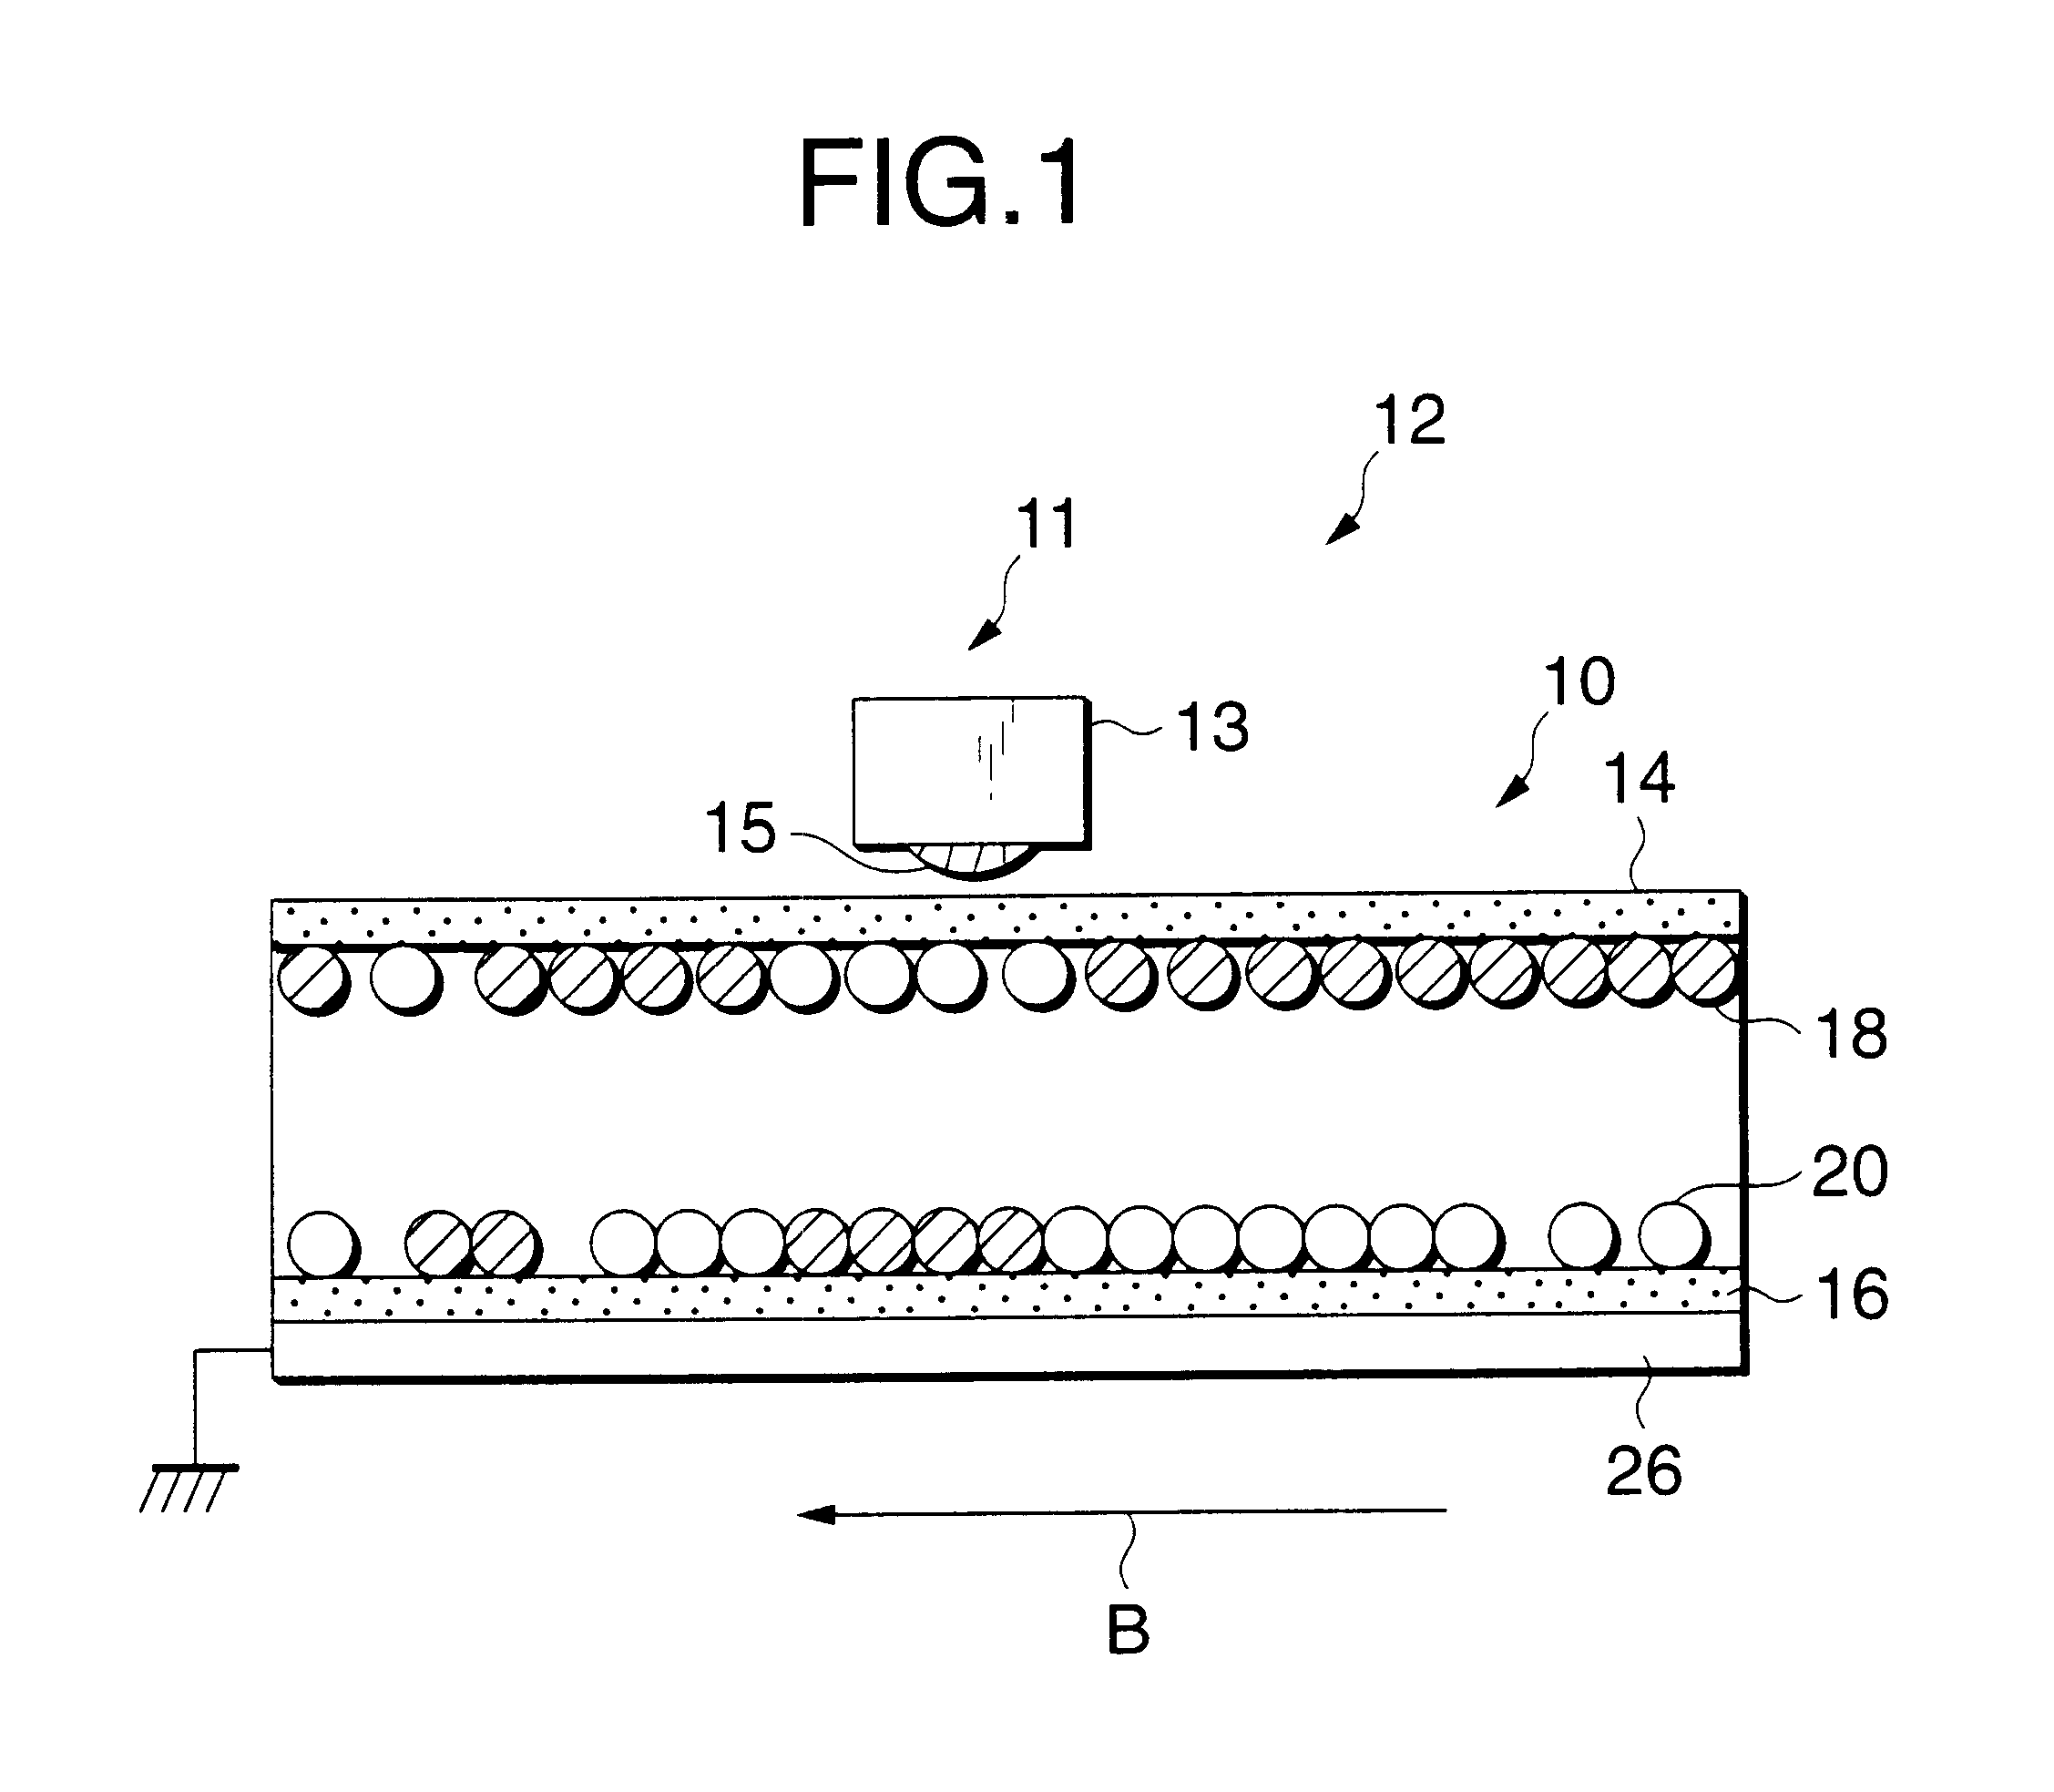 Image display medium, image-forming method and image-forming apparatus capable of repetitive writing on the image display medium